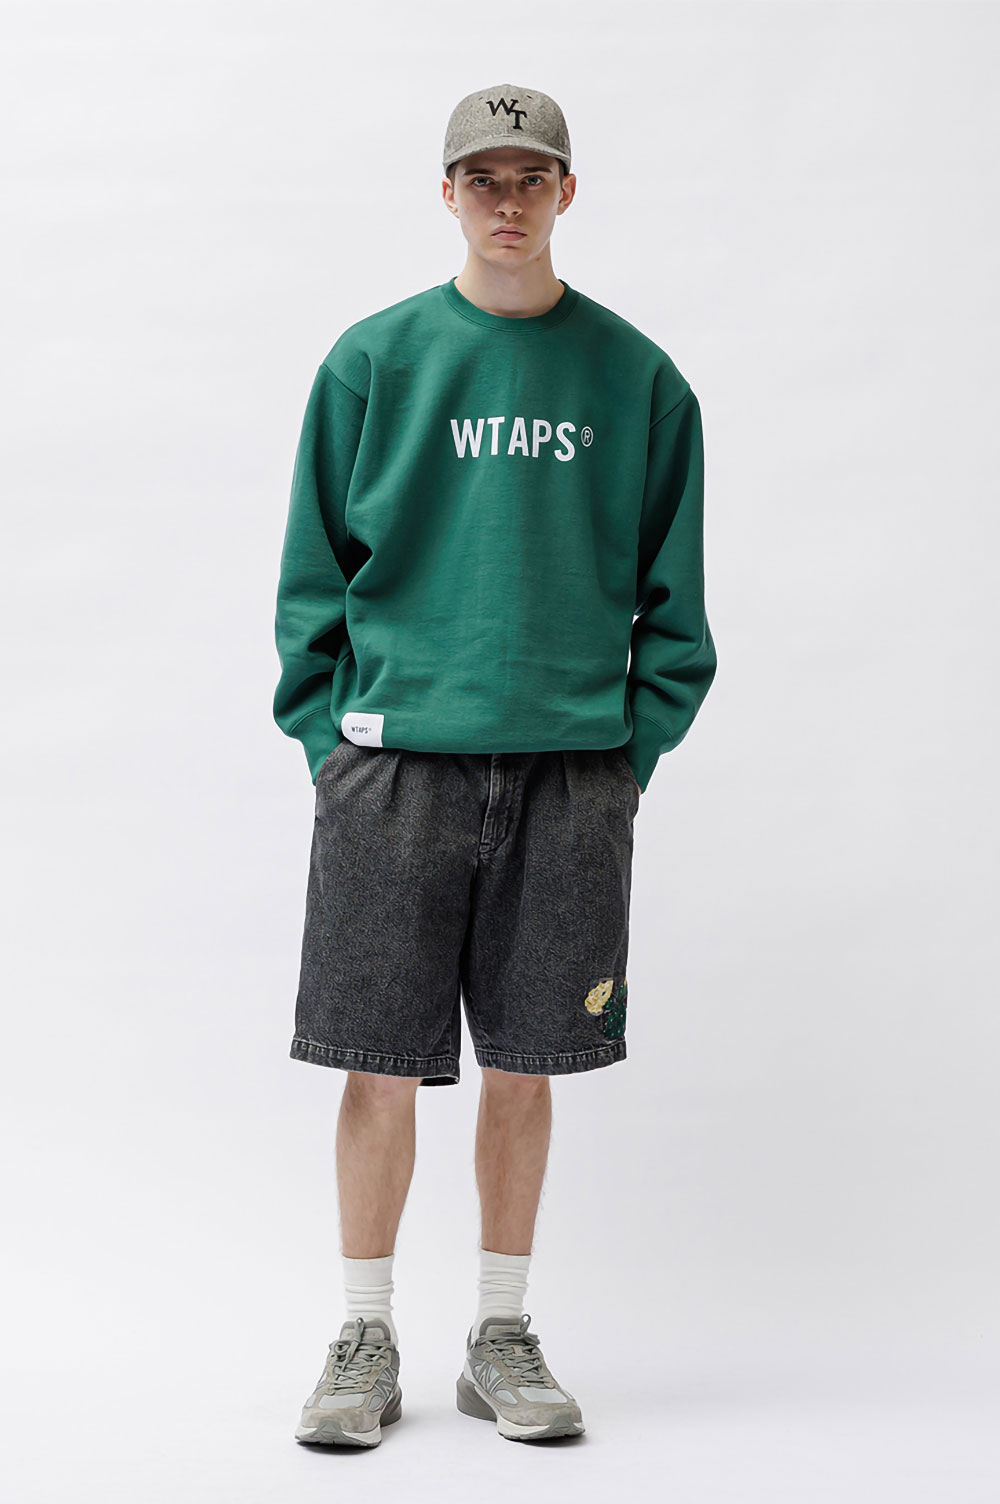 WTAPS SIGN / SWEATER / COTTON. TSSC | www.fitwellind.com